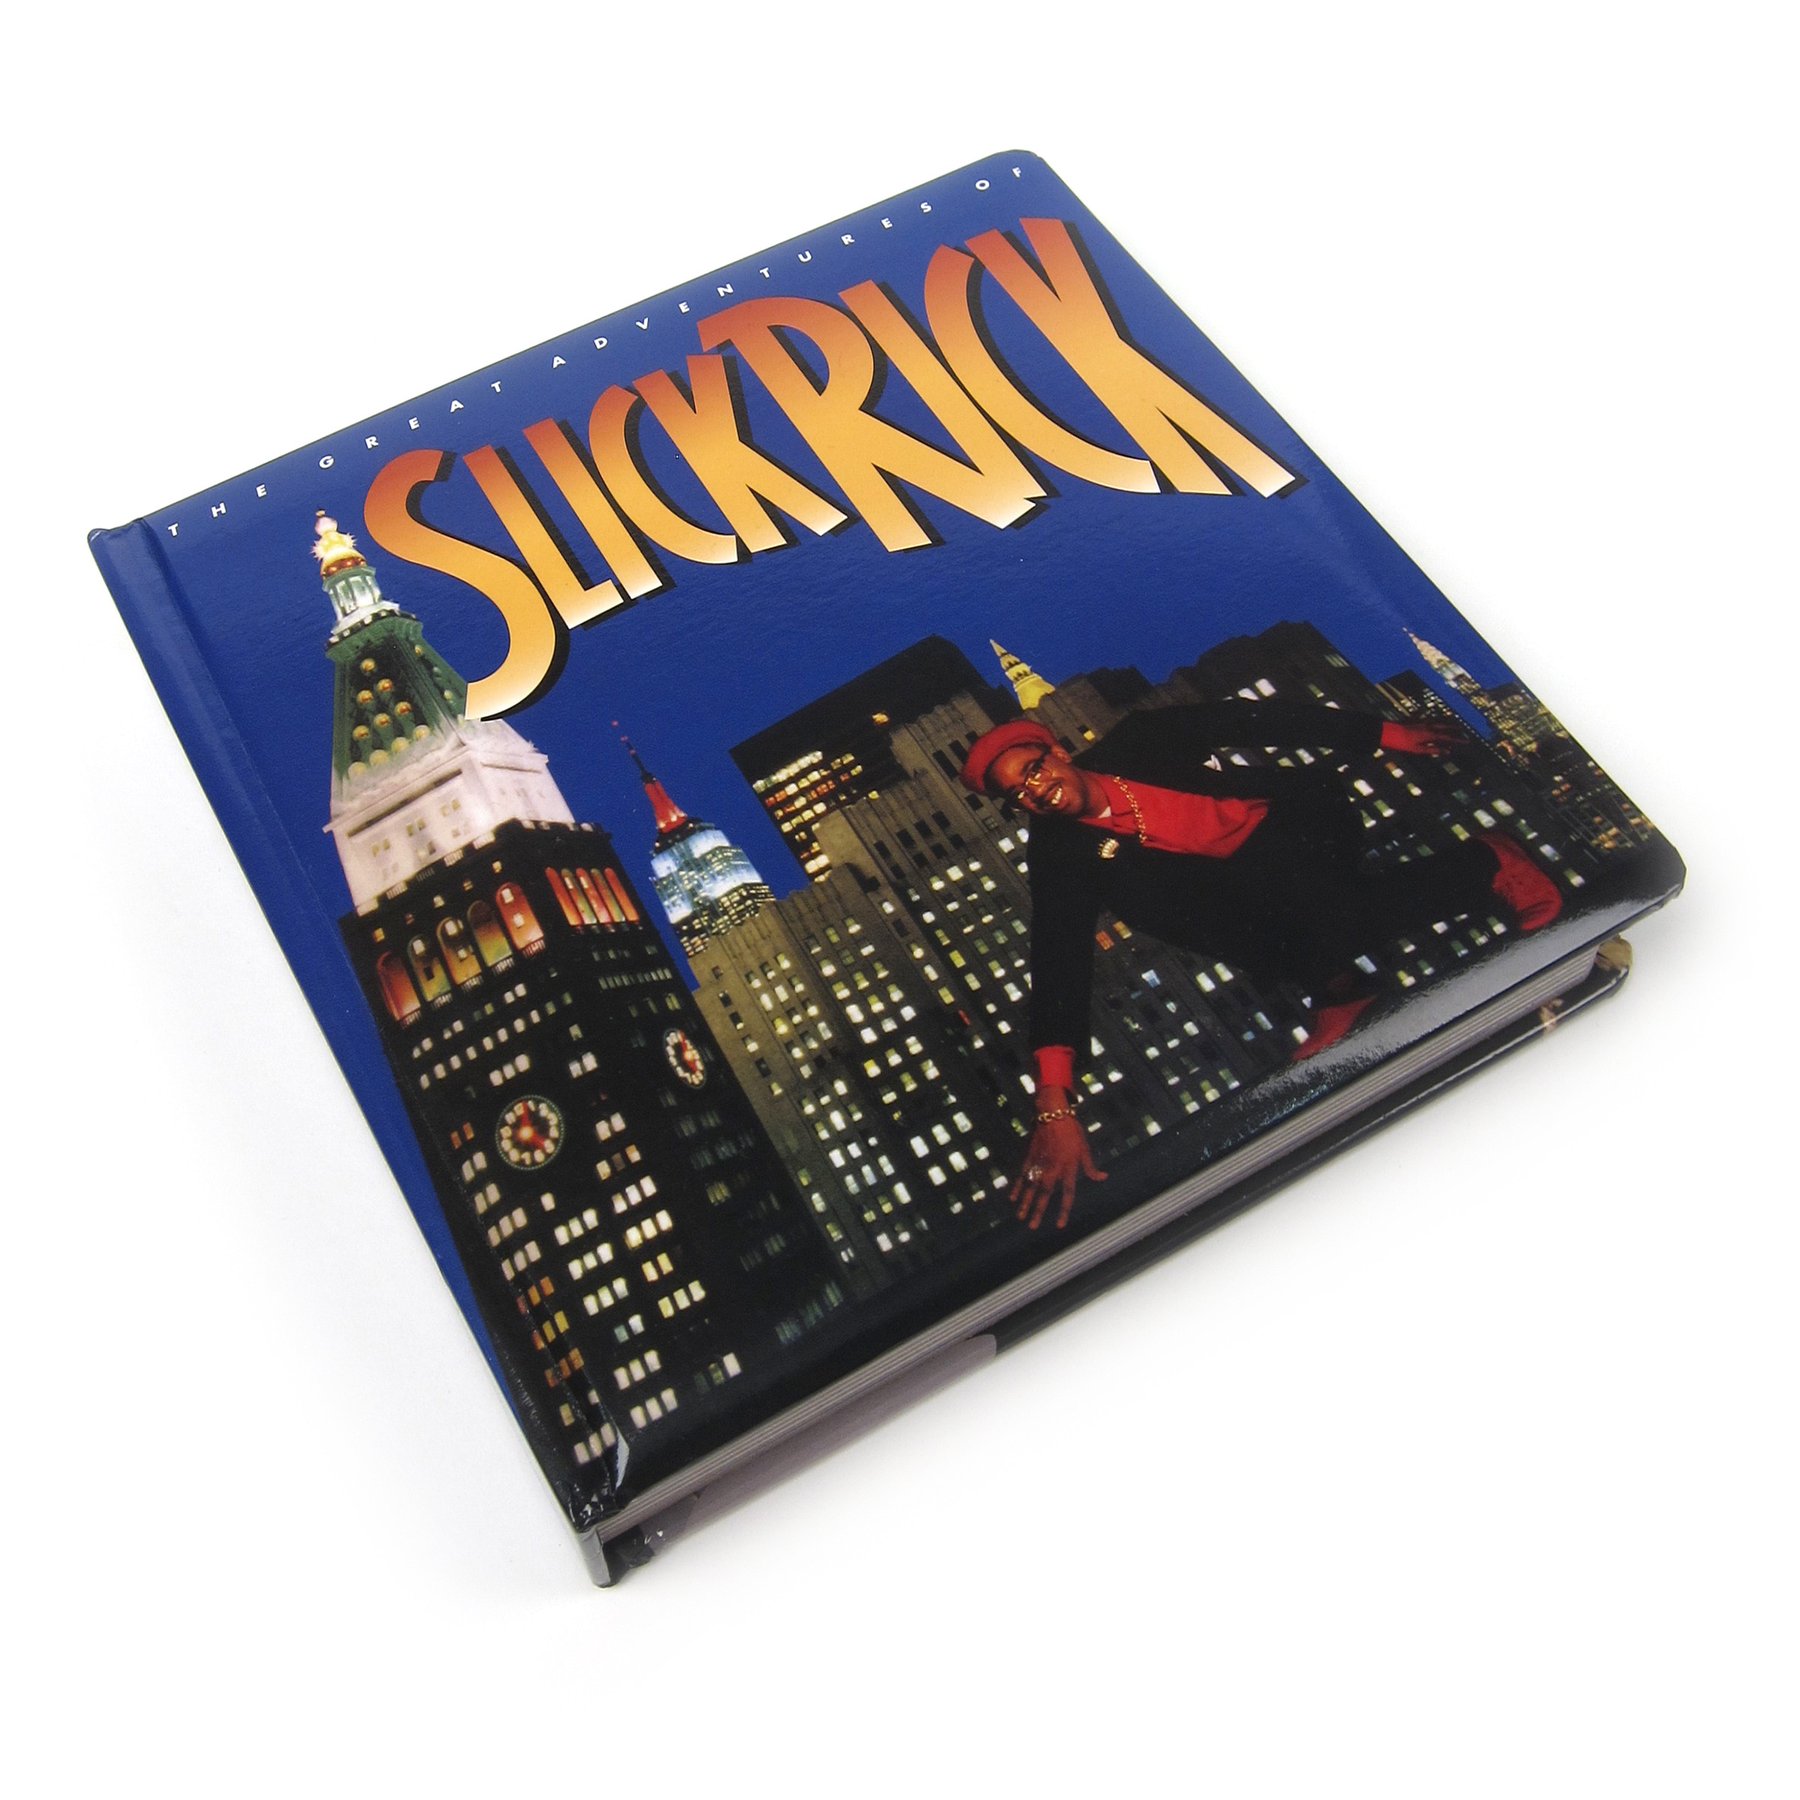 SLICK RICK / スリック・リック / THE GREAT ADVENTURES OF SLICK RICK (CHILDREN'S BOOK WITH CD) 